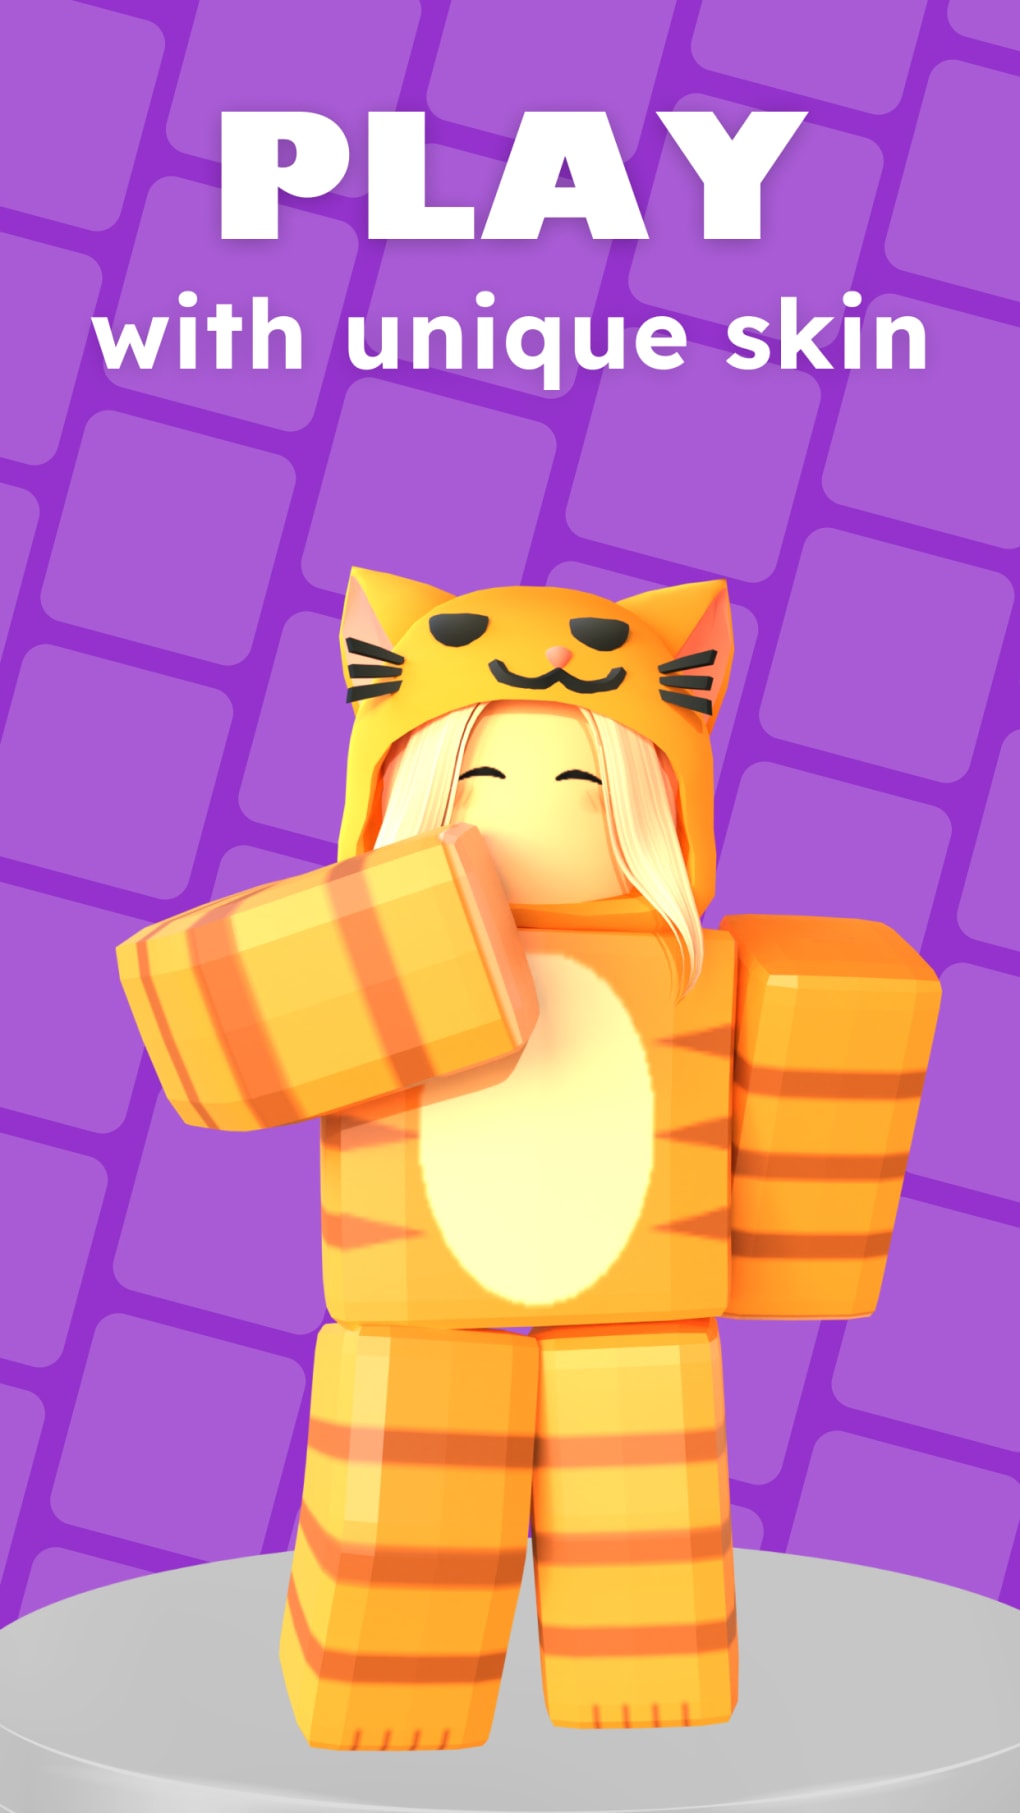 Skins For Roblox Clothes for Android - Free App Download